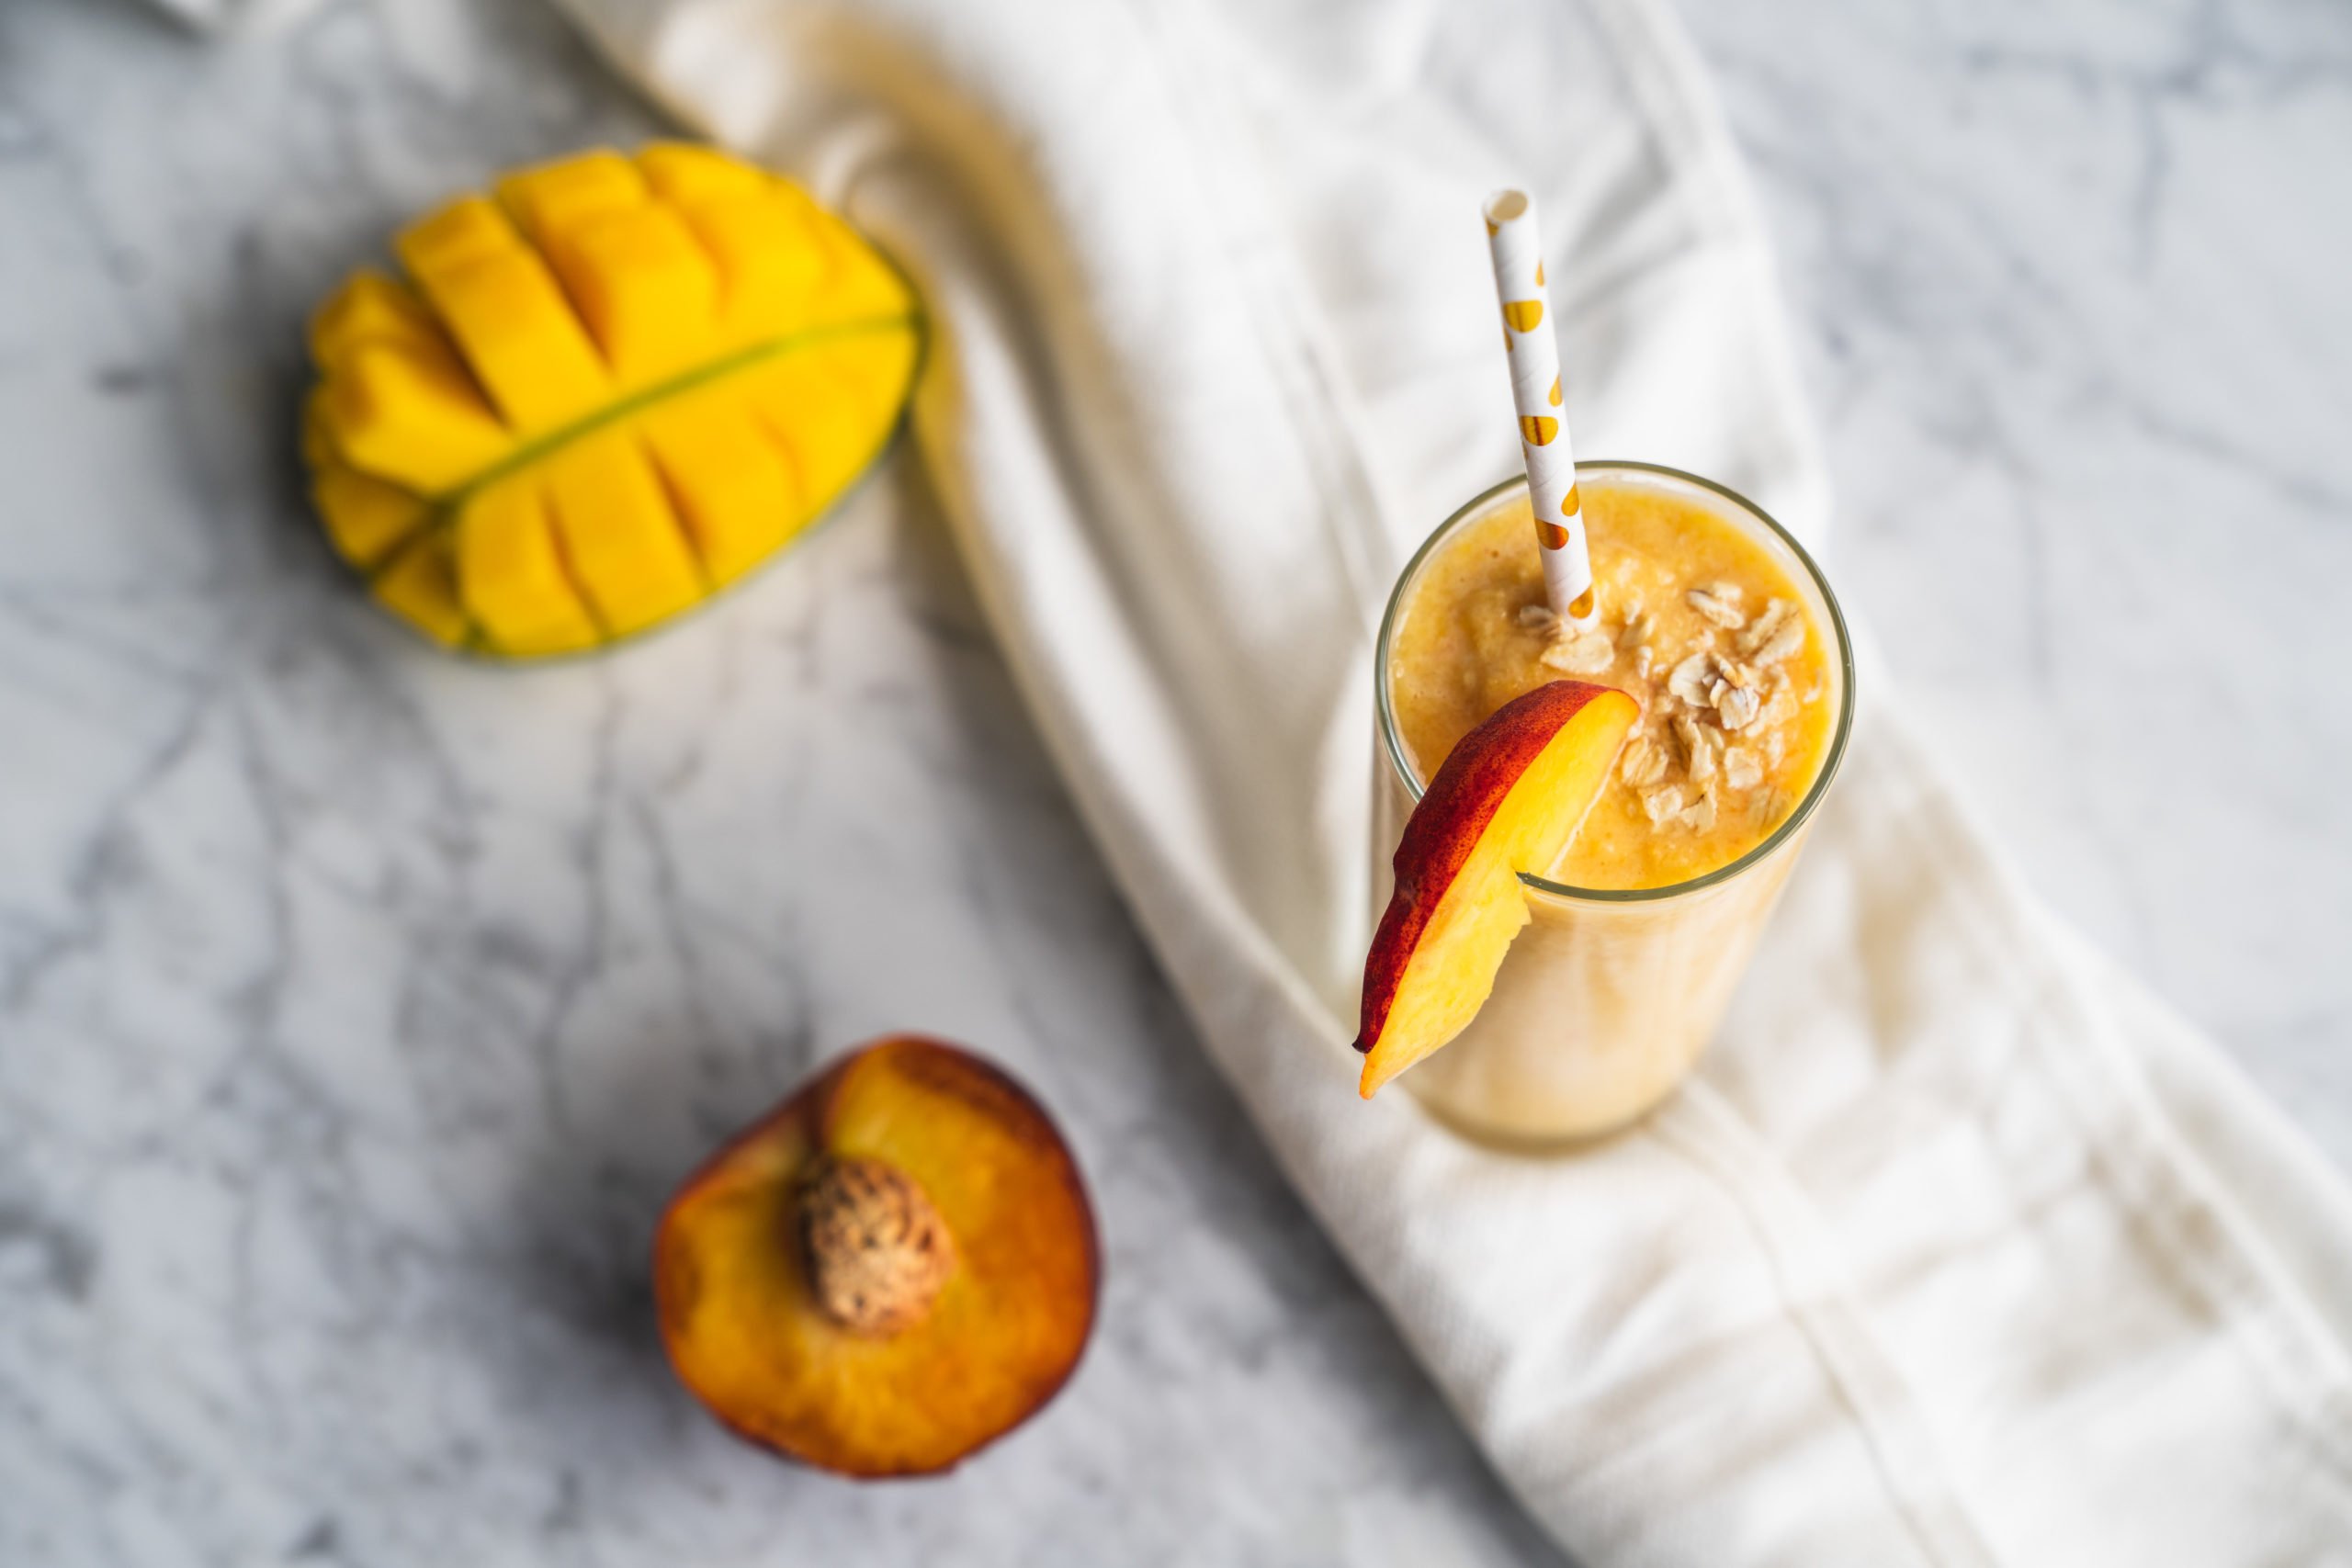 Delicious peach mango smoothie sitting on a table cloth with halves of mango and peach surrounding it.